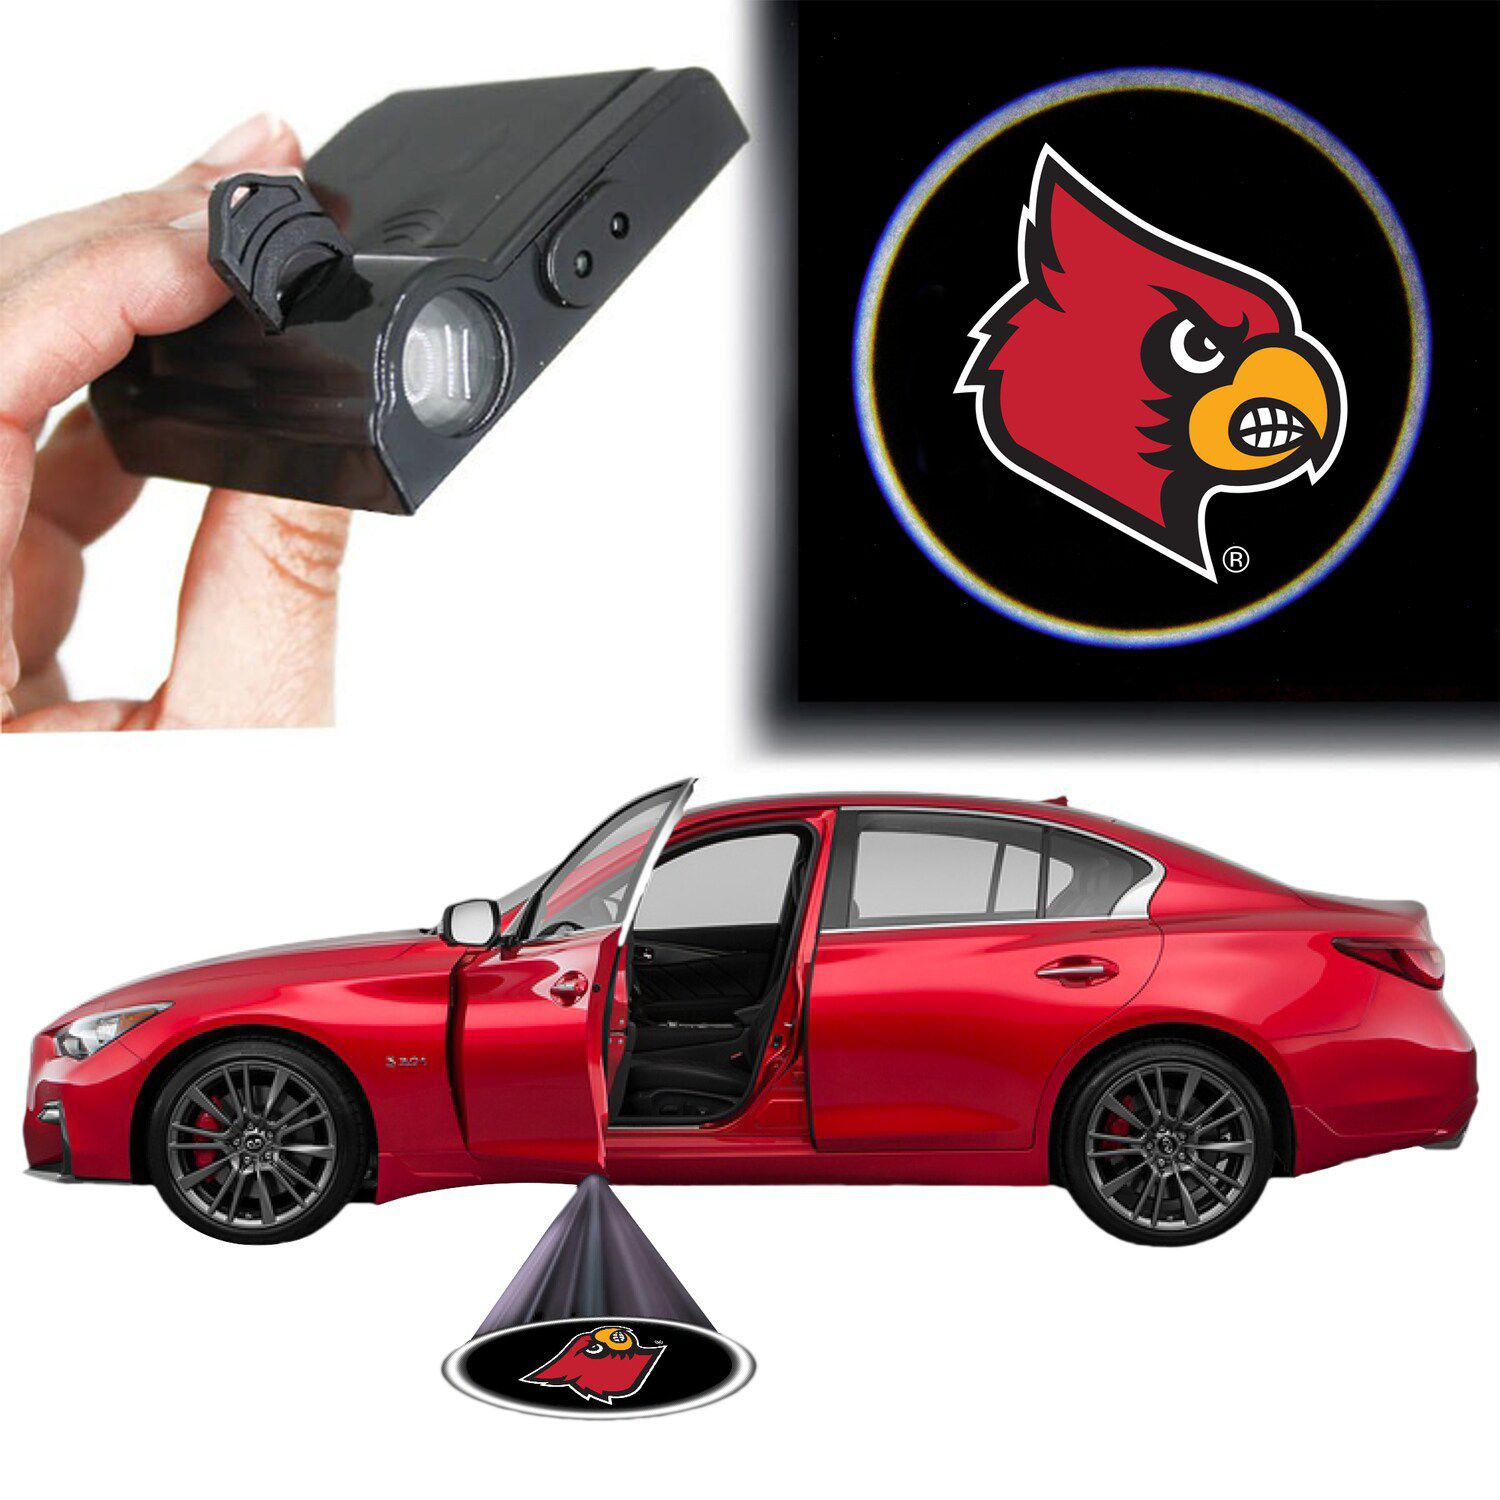 St. Louis Cardinals Oval Car Hitch Cover